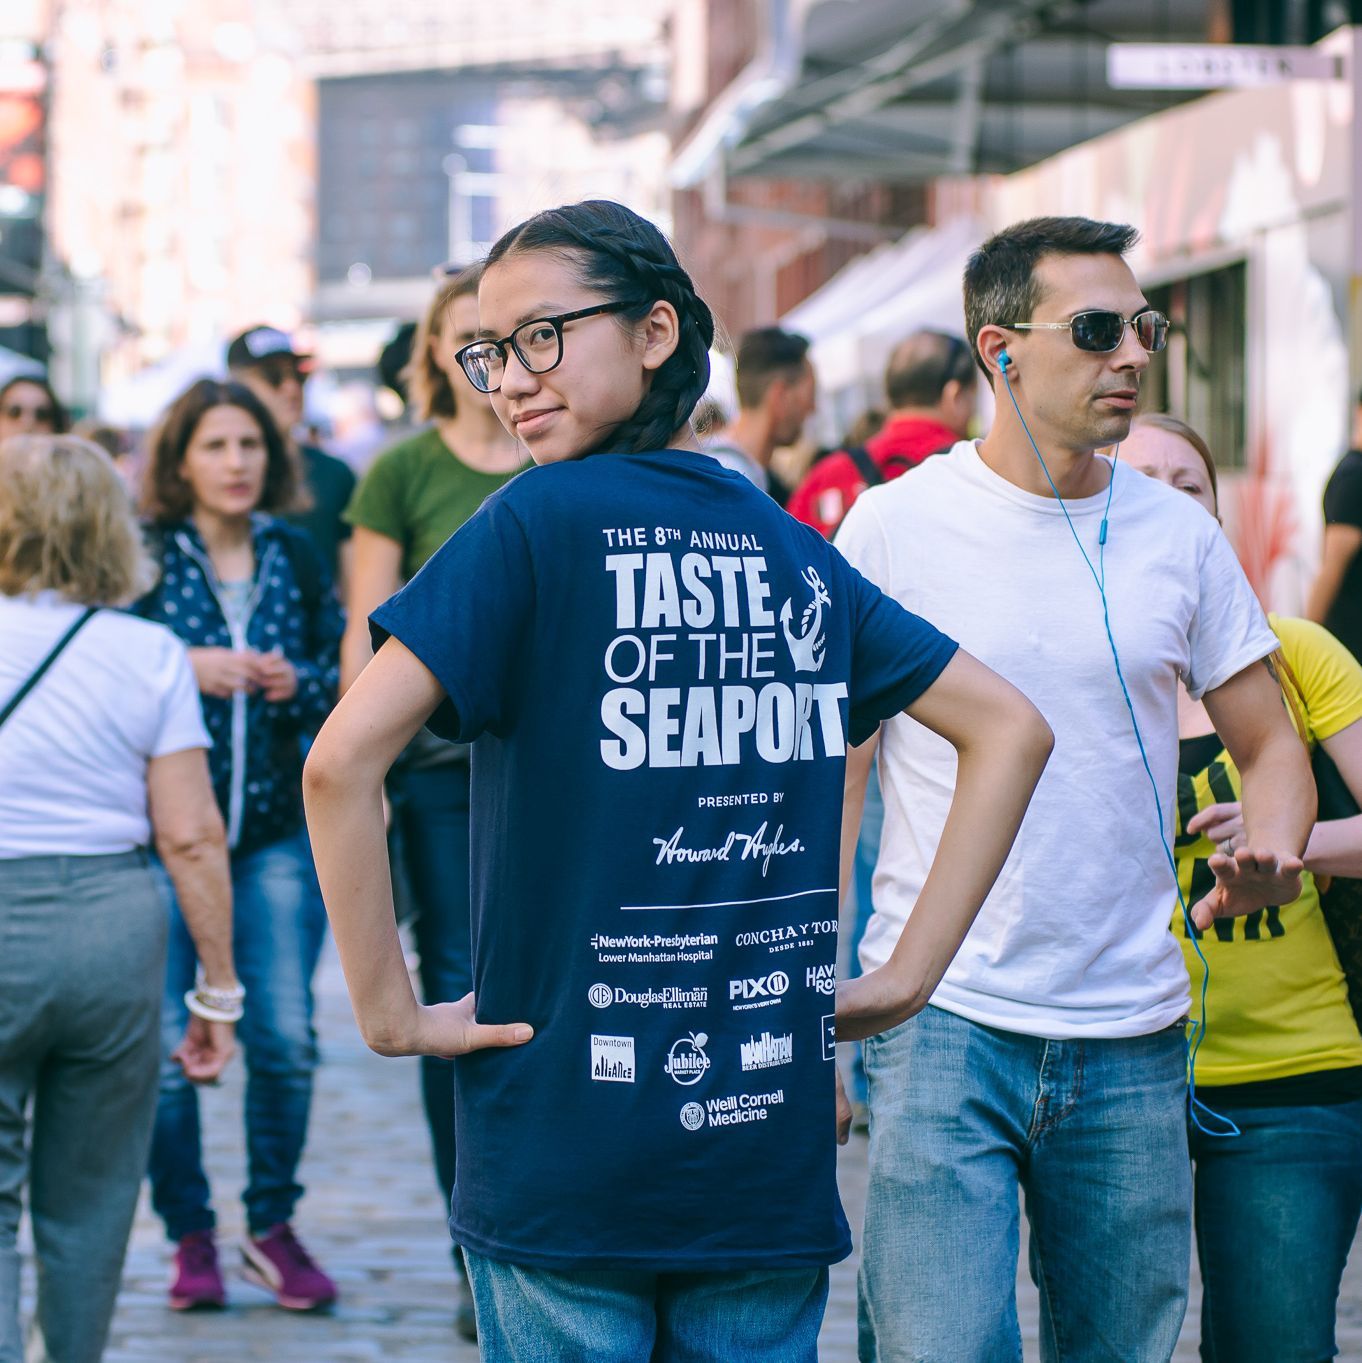 The Taste of the Seaport is back. Food, fun and supporting local schools🖤 October 16 ✶ 12-3pm Tickets ➤ Link in bio. #TheSeaport #HHCares